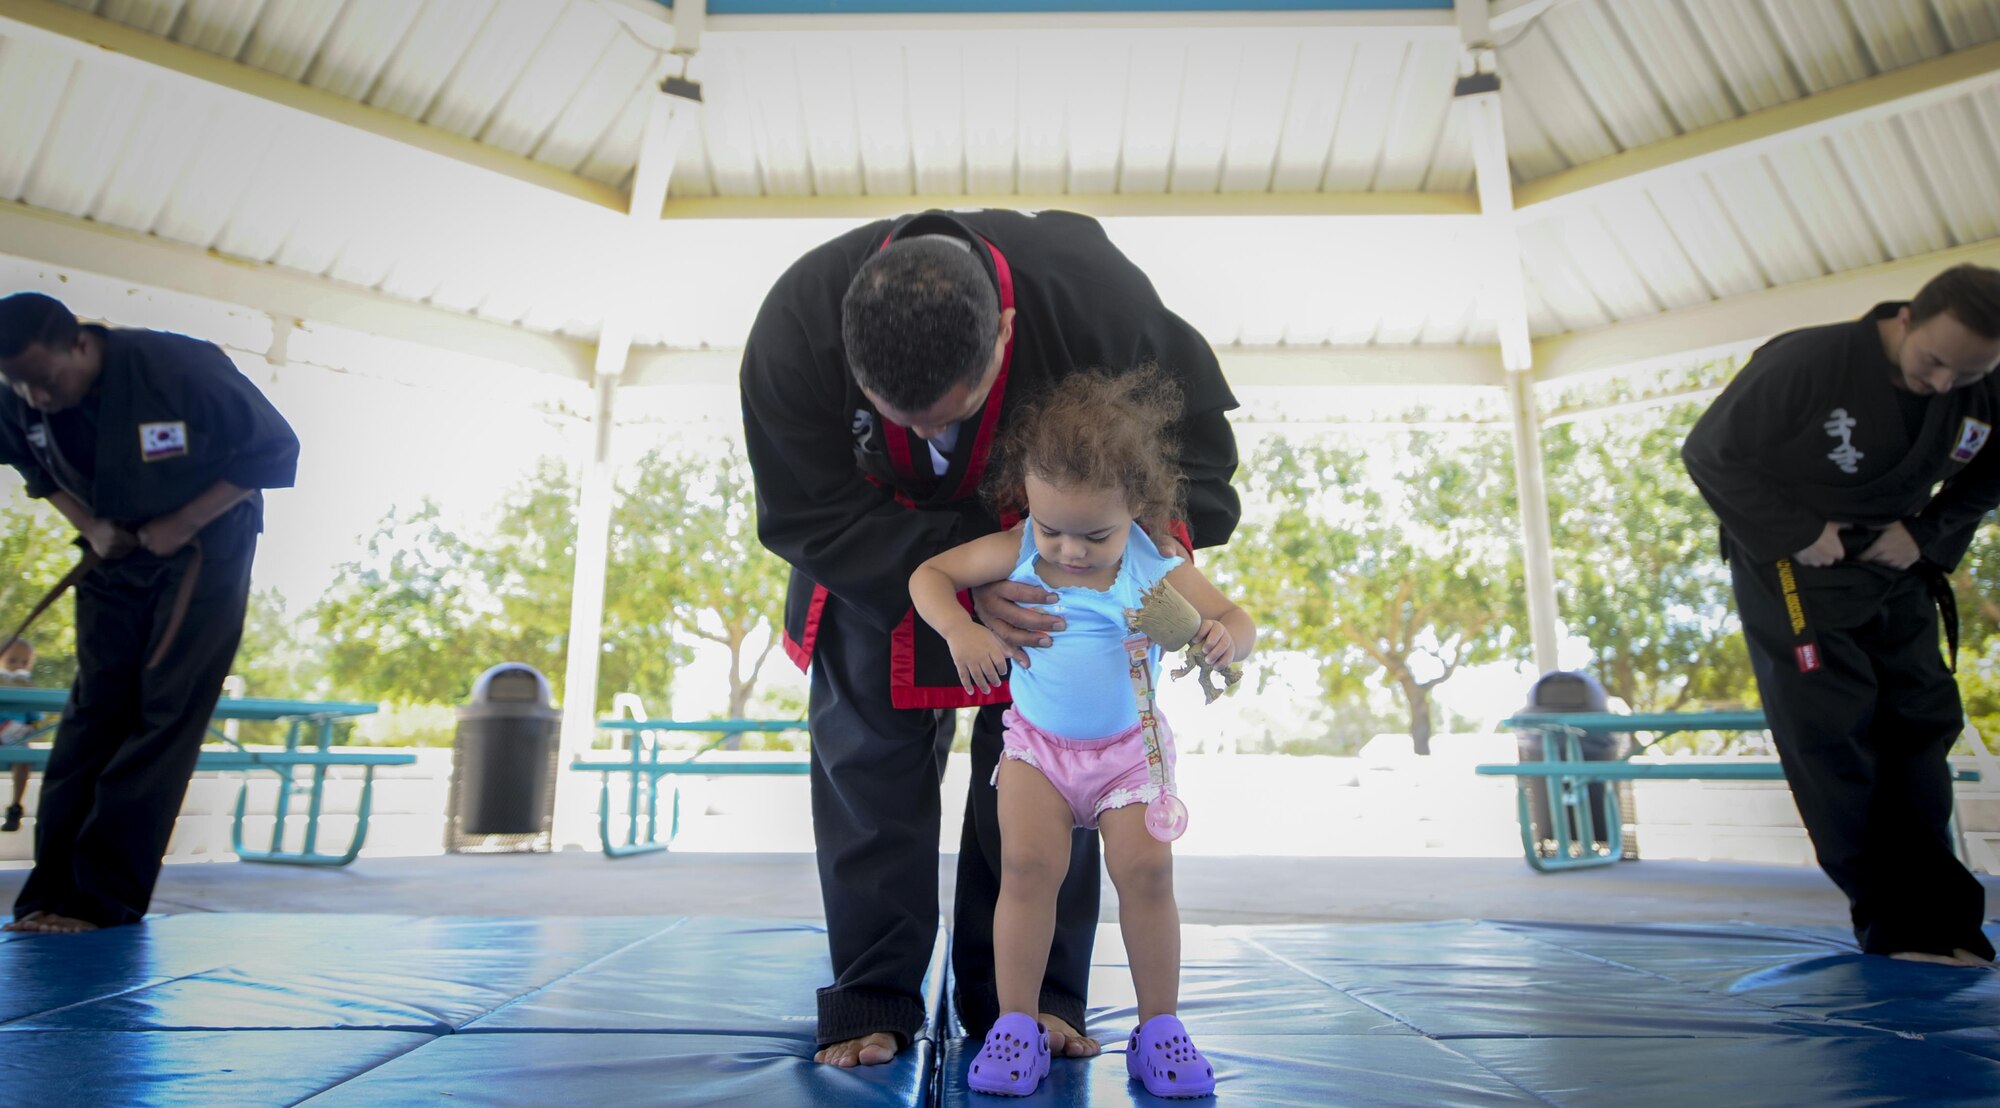 Amado Garcia, a Kuk Sool Won instructor, bows with his daughter after completing a demonstration at the Asian American and Pacific Islander Cultural Day event at Hurlburt Field, Fla., May 25, 2017. Kuk Sool Won is a martial art system that was founded in 1961. The event included the demonstration, free food and a hula demonstration. (U.S. Air Force photo by Airman 1st Class Dennis Spain )